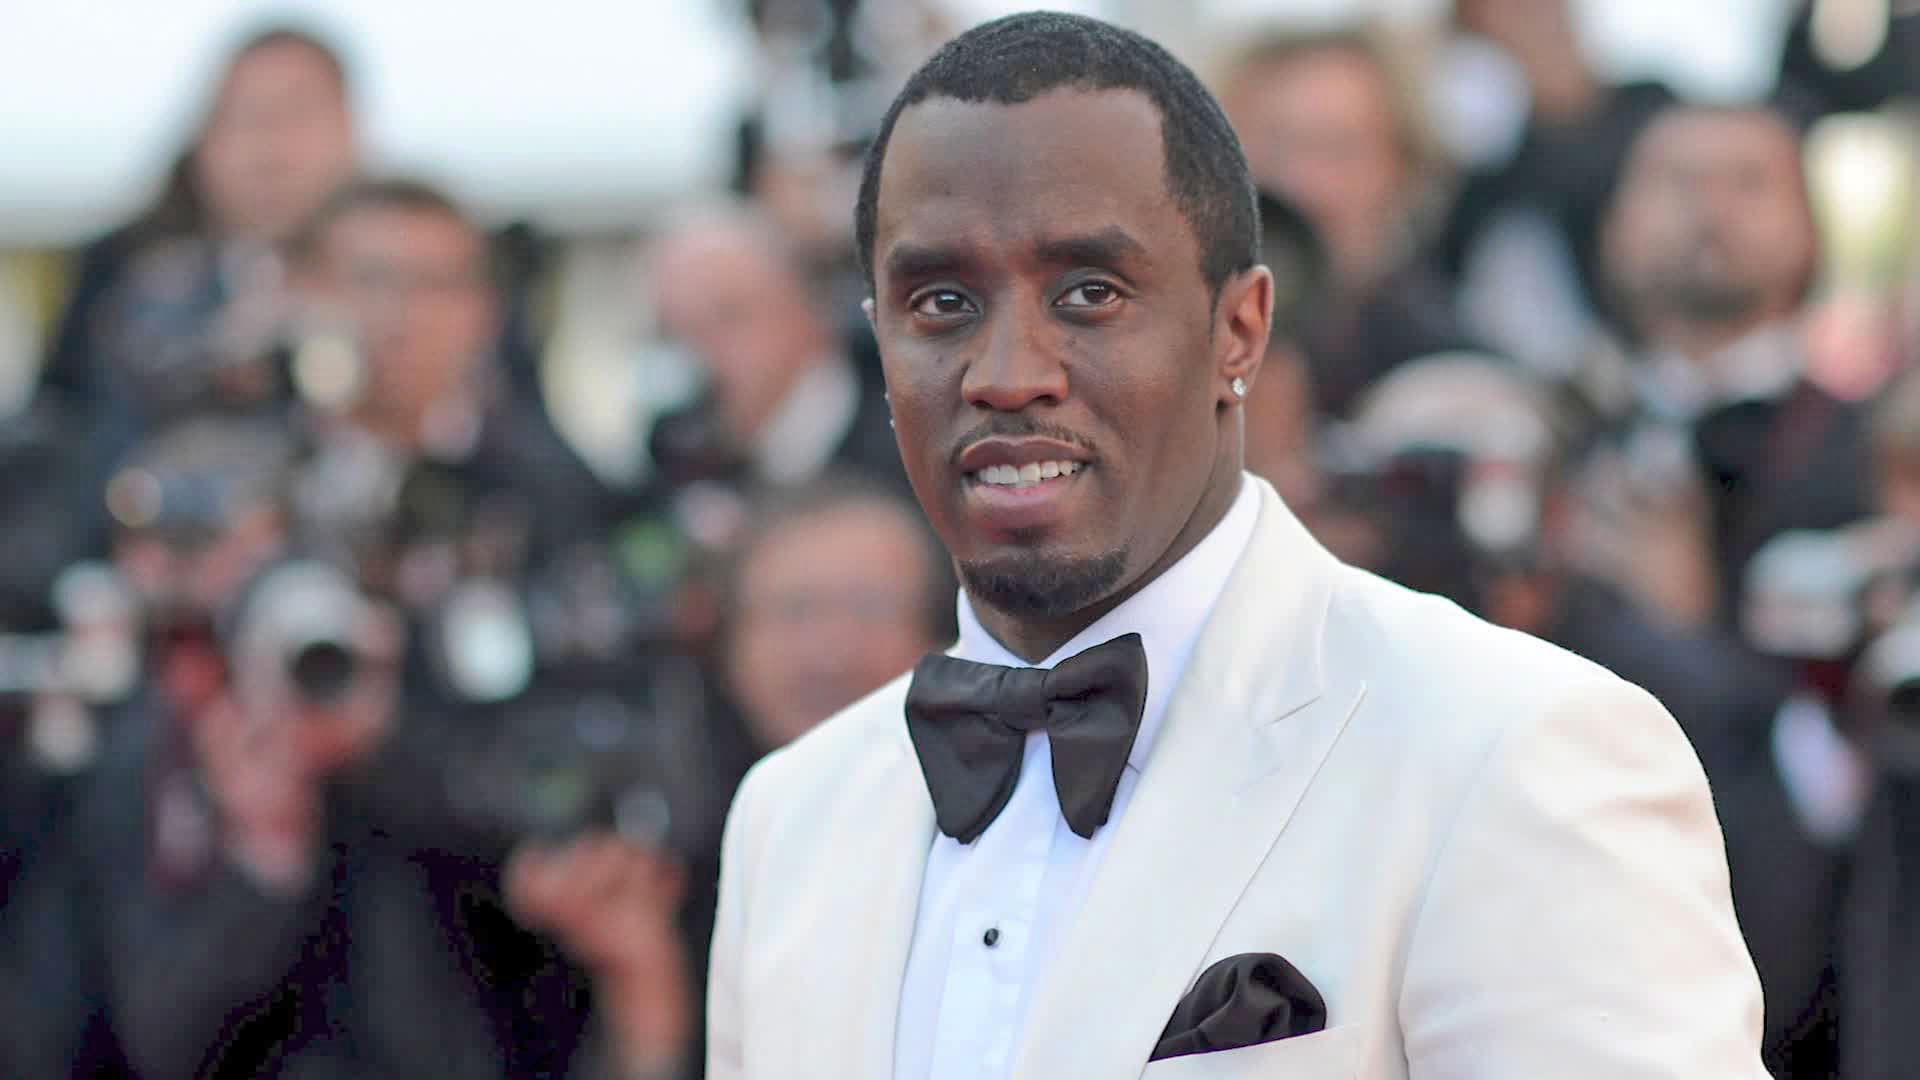 ”diddy-receives-backlash-following-this-recent-post-about-the-election”